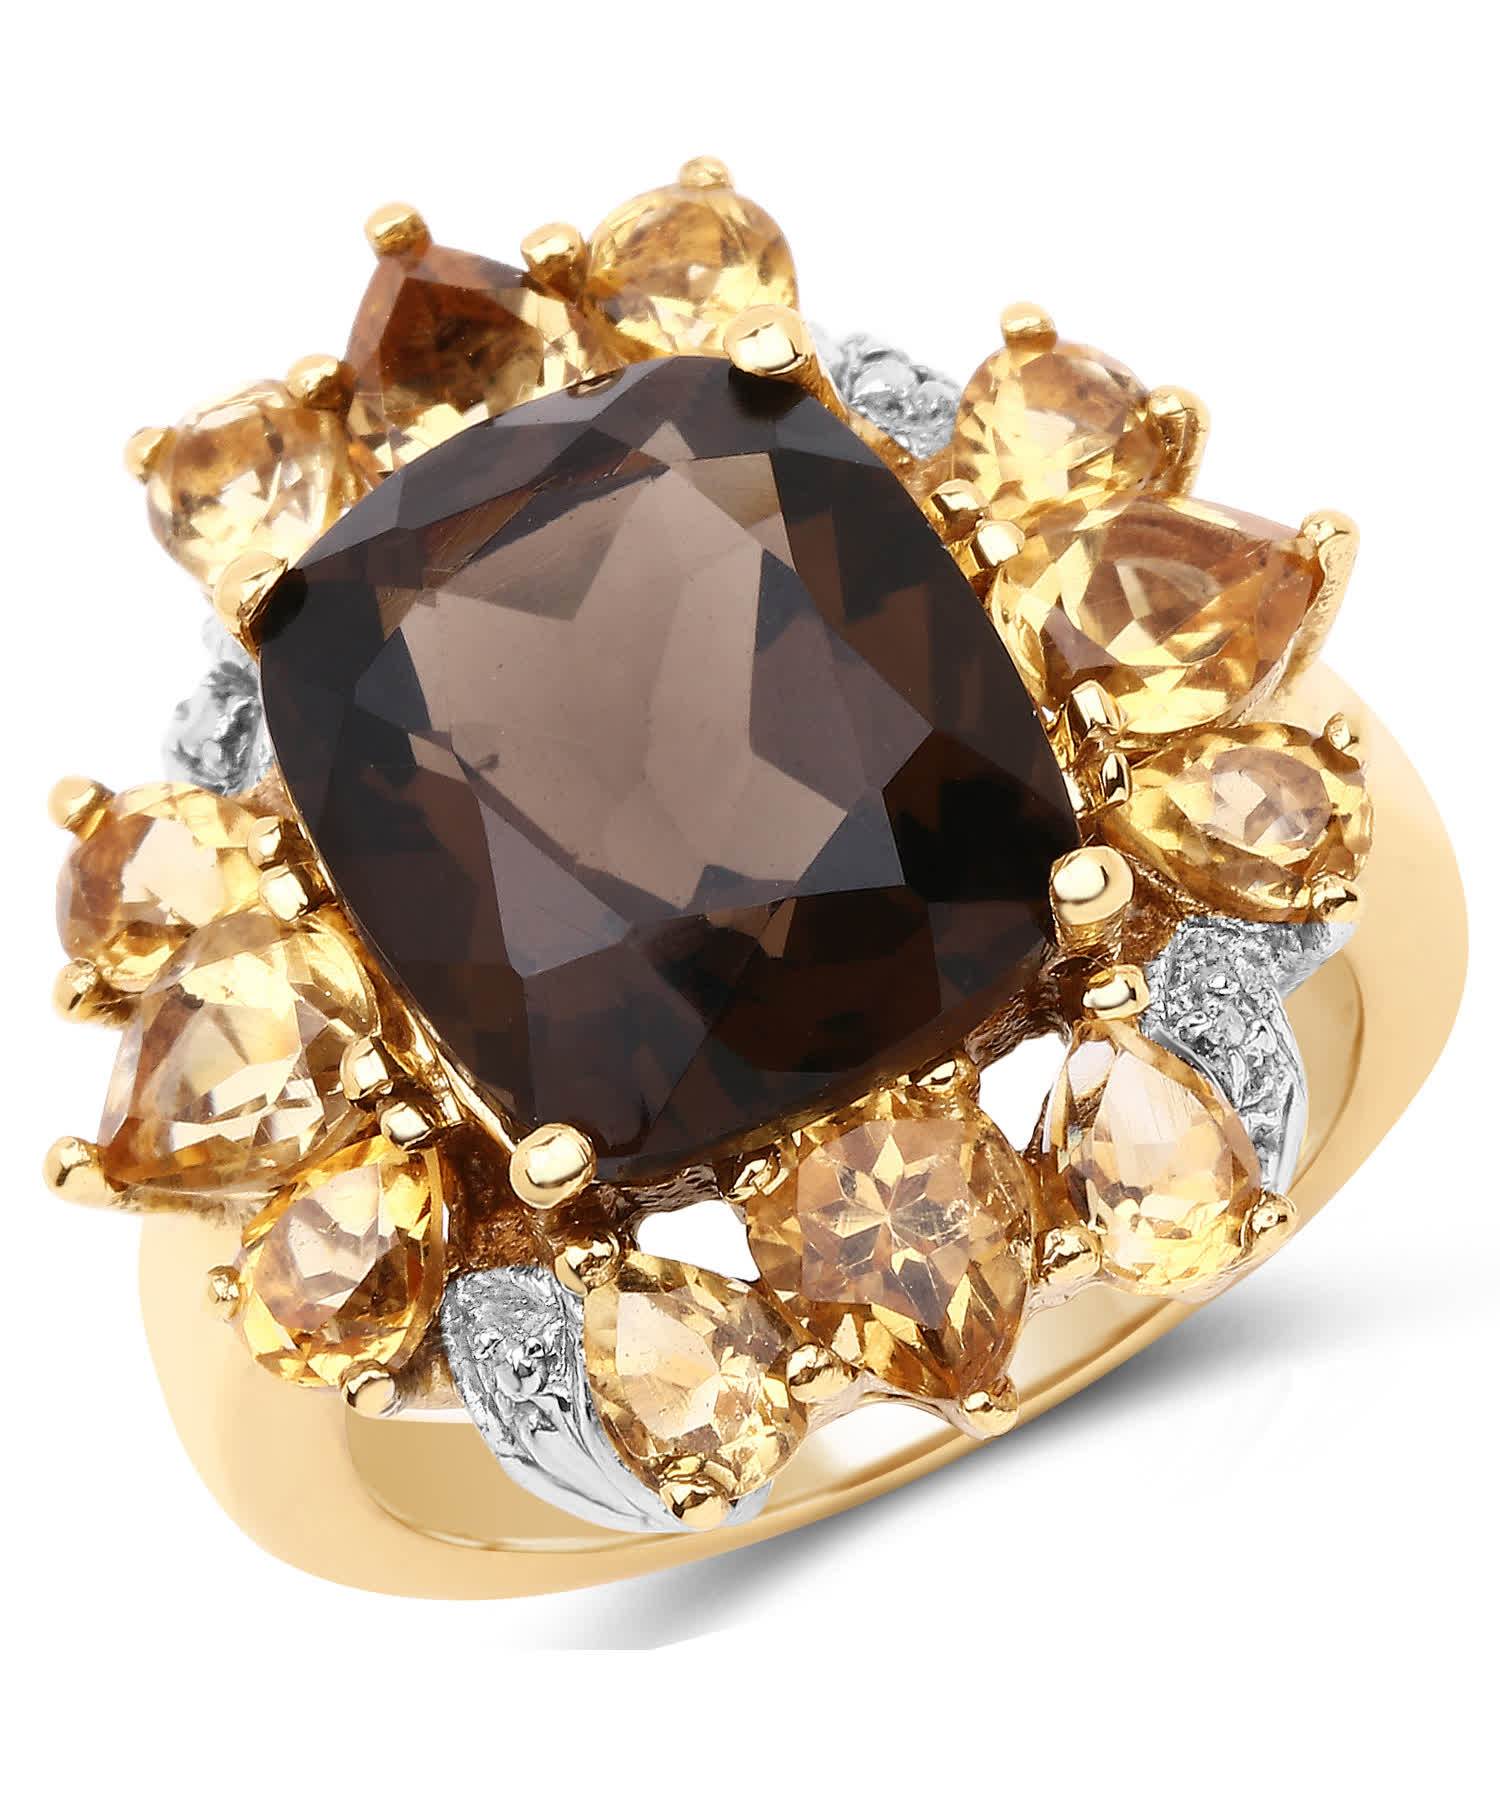 7.10ctw Natural Smoky Quartz, Golden Citrine and Topaz 14k Gold Plated Cocktail Ring View 1